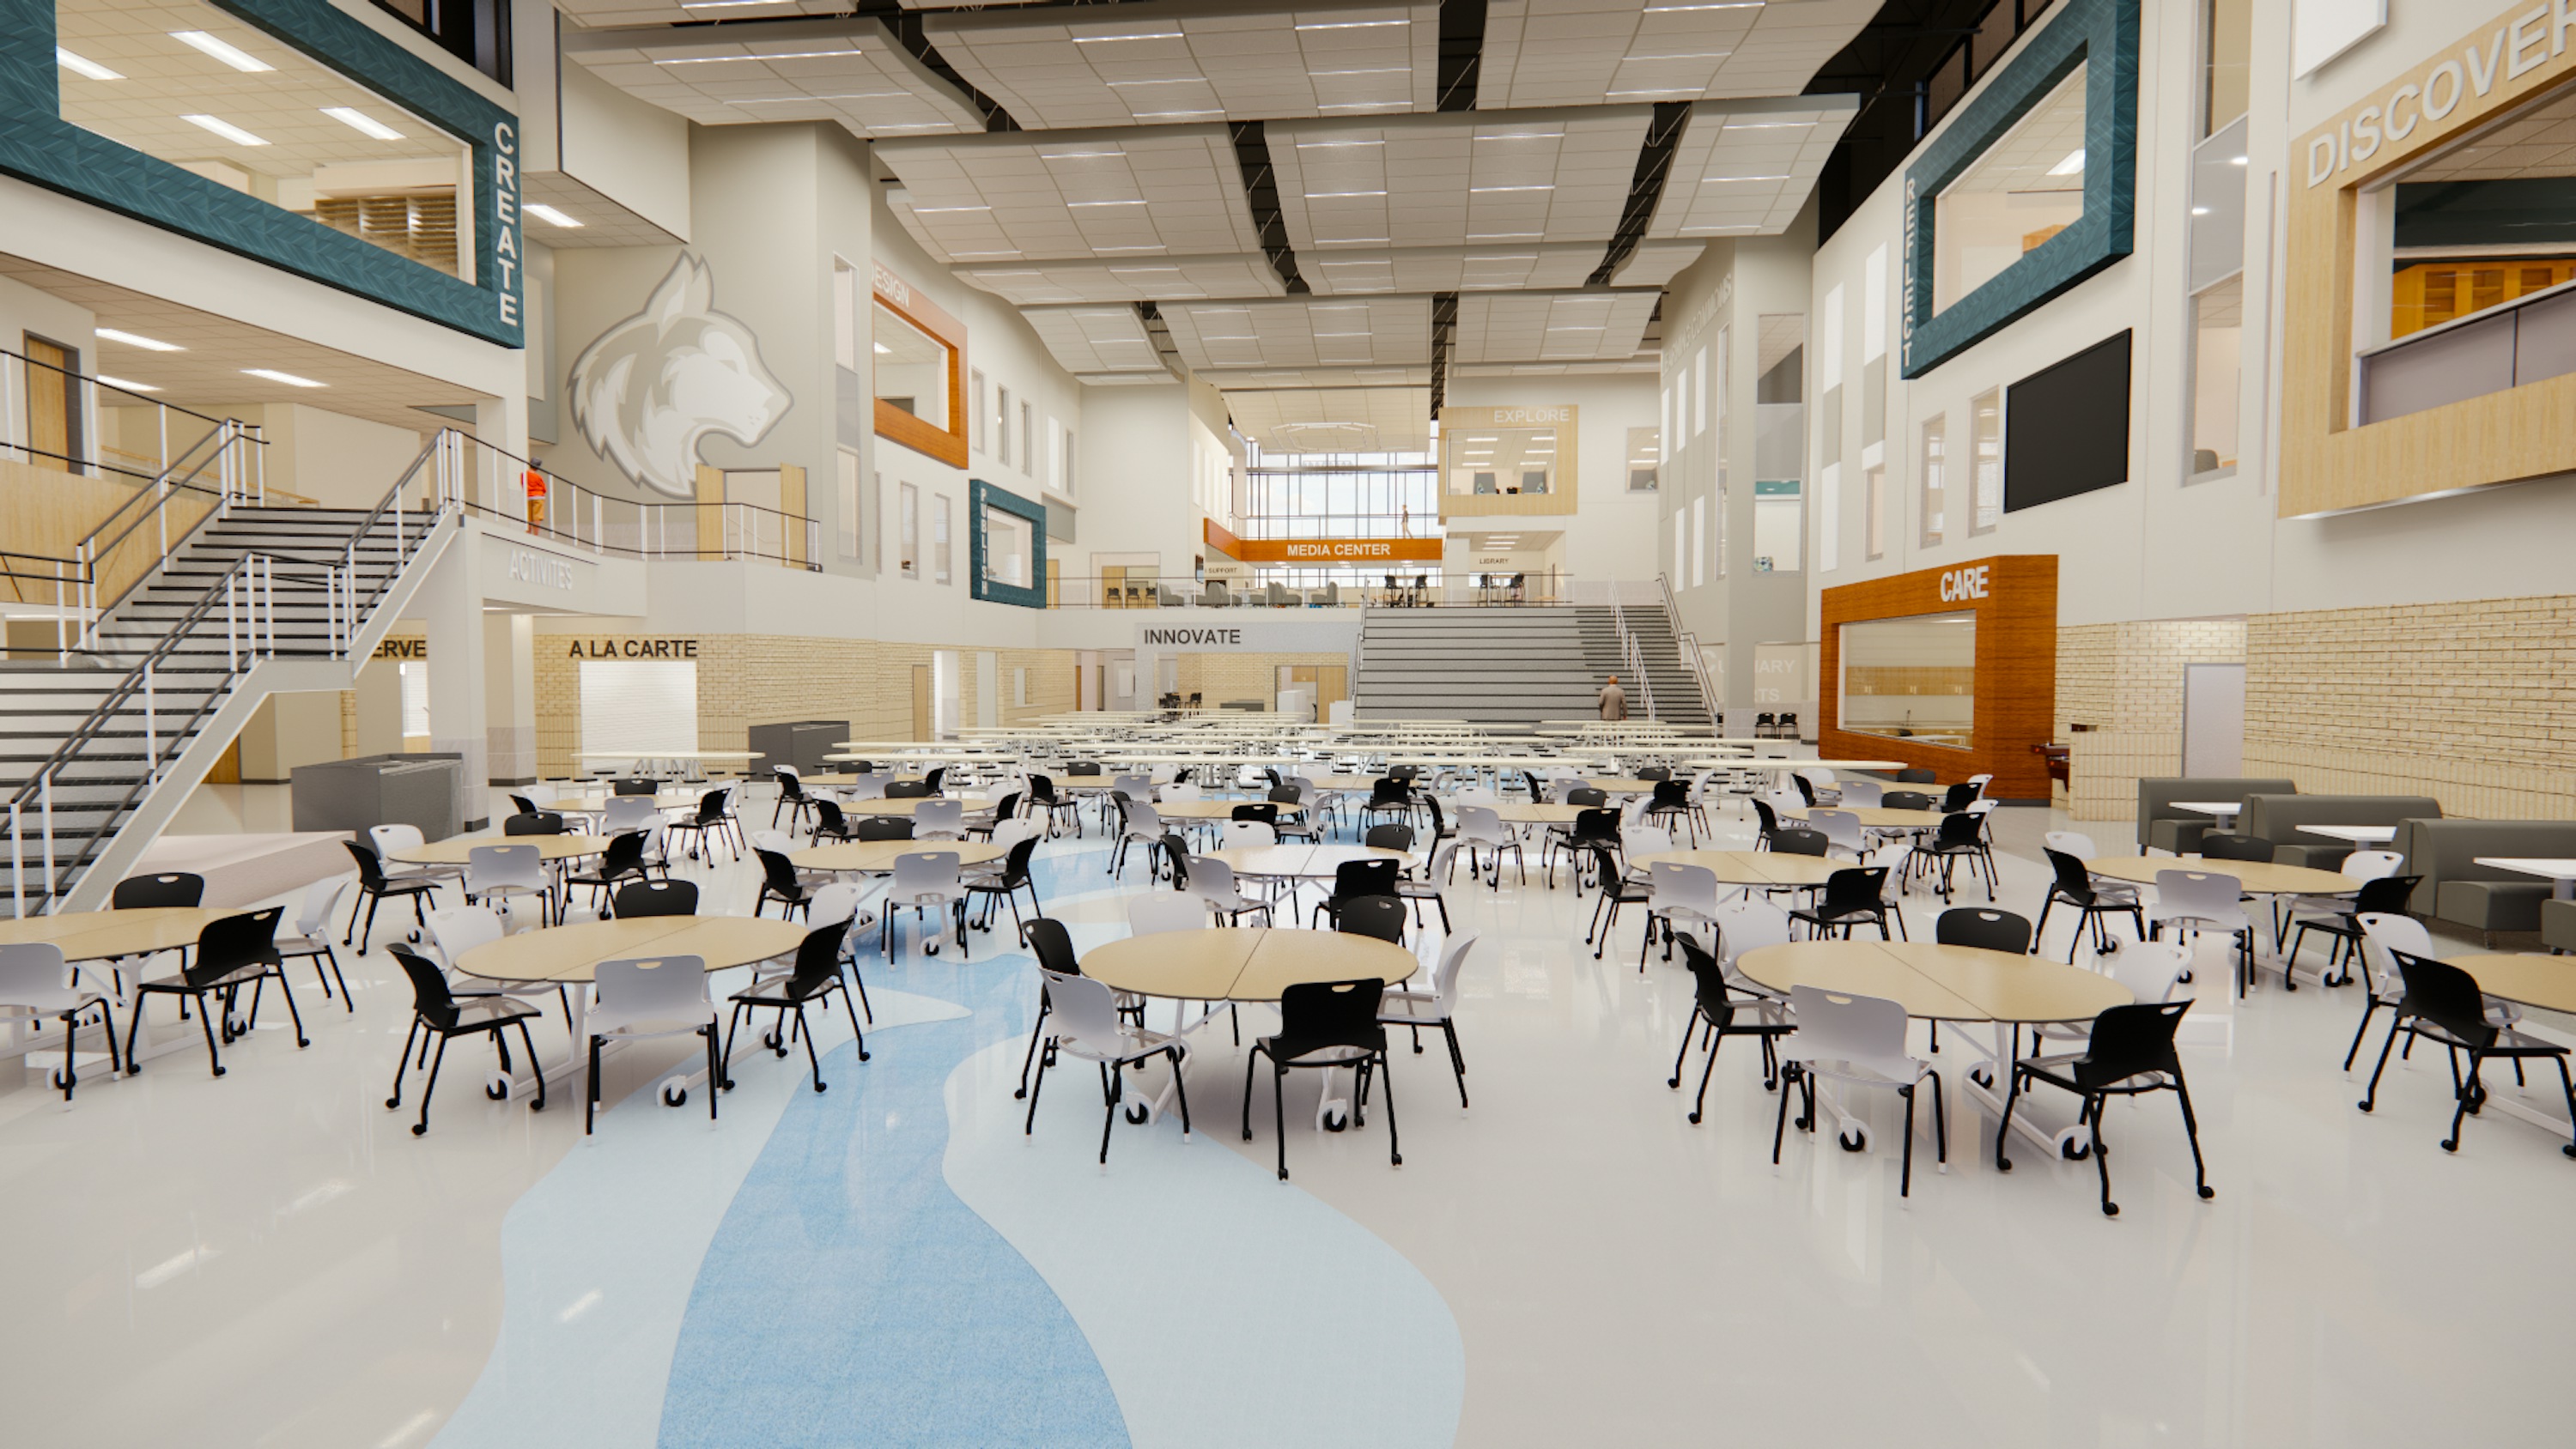 Owatonna High School Wold Architects & Engineers